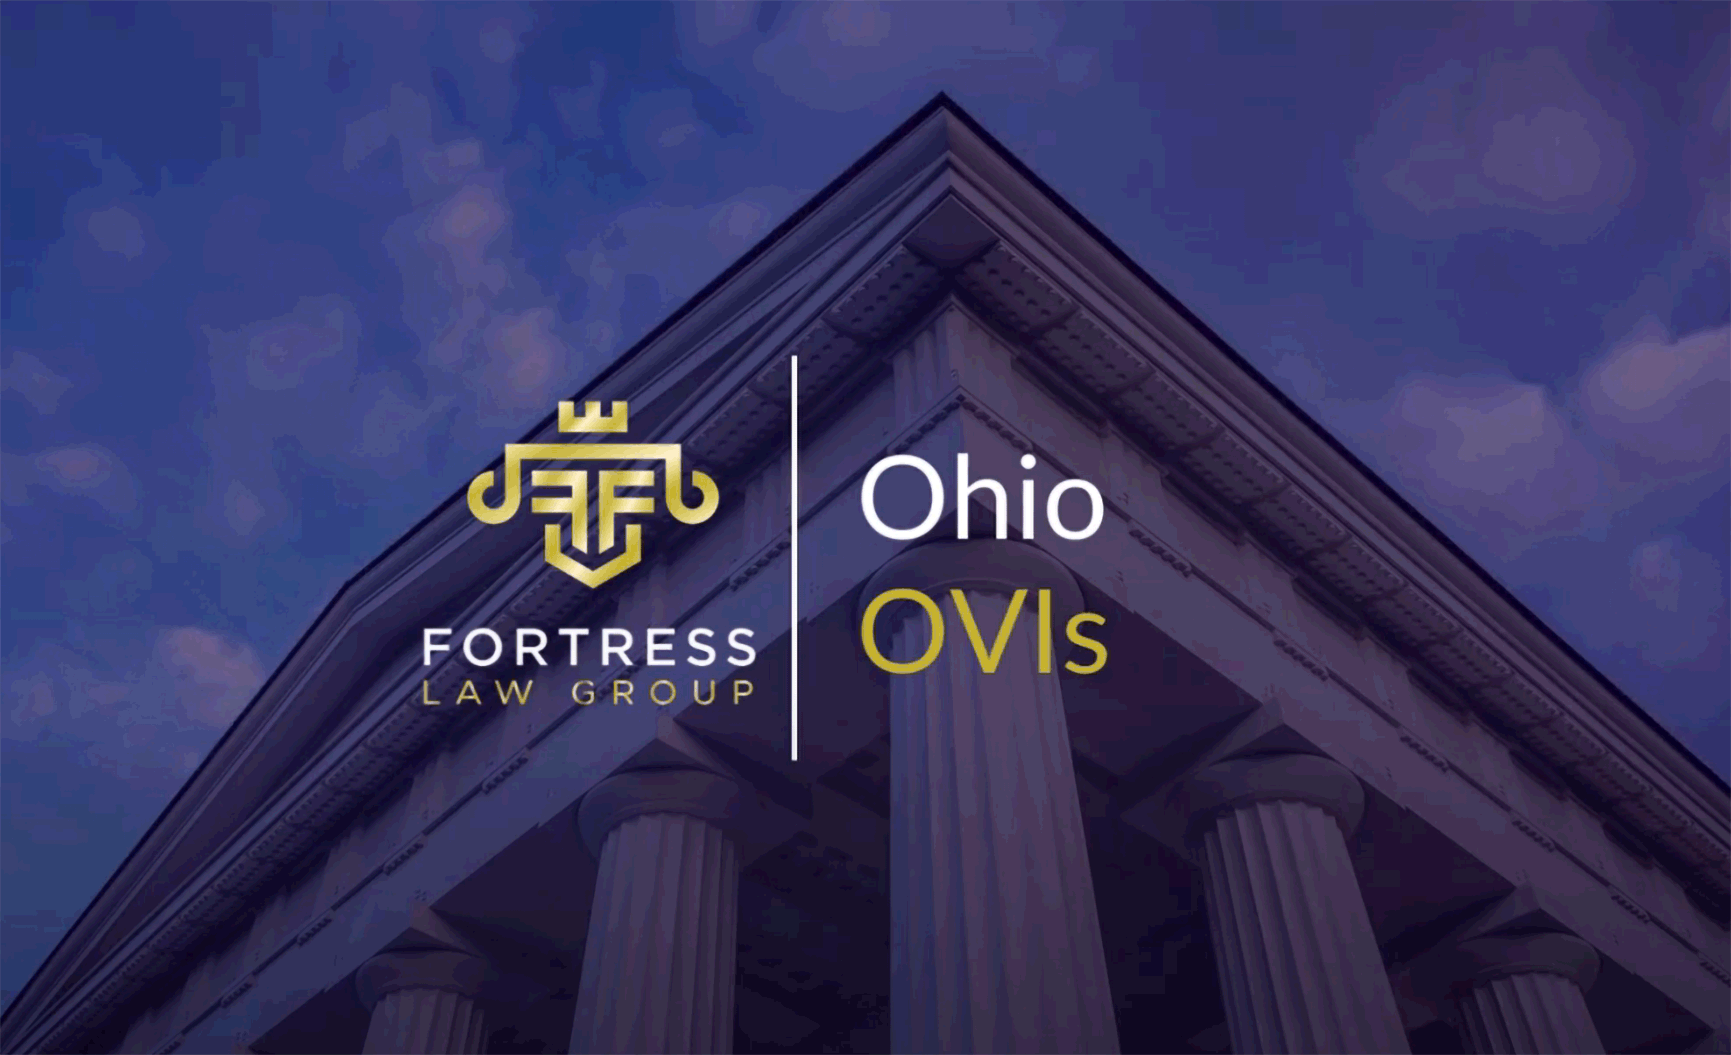 Ohio DUI/OVI Defense Lawyer - What To Know If You've Been Charged With OVI